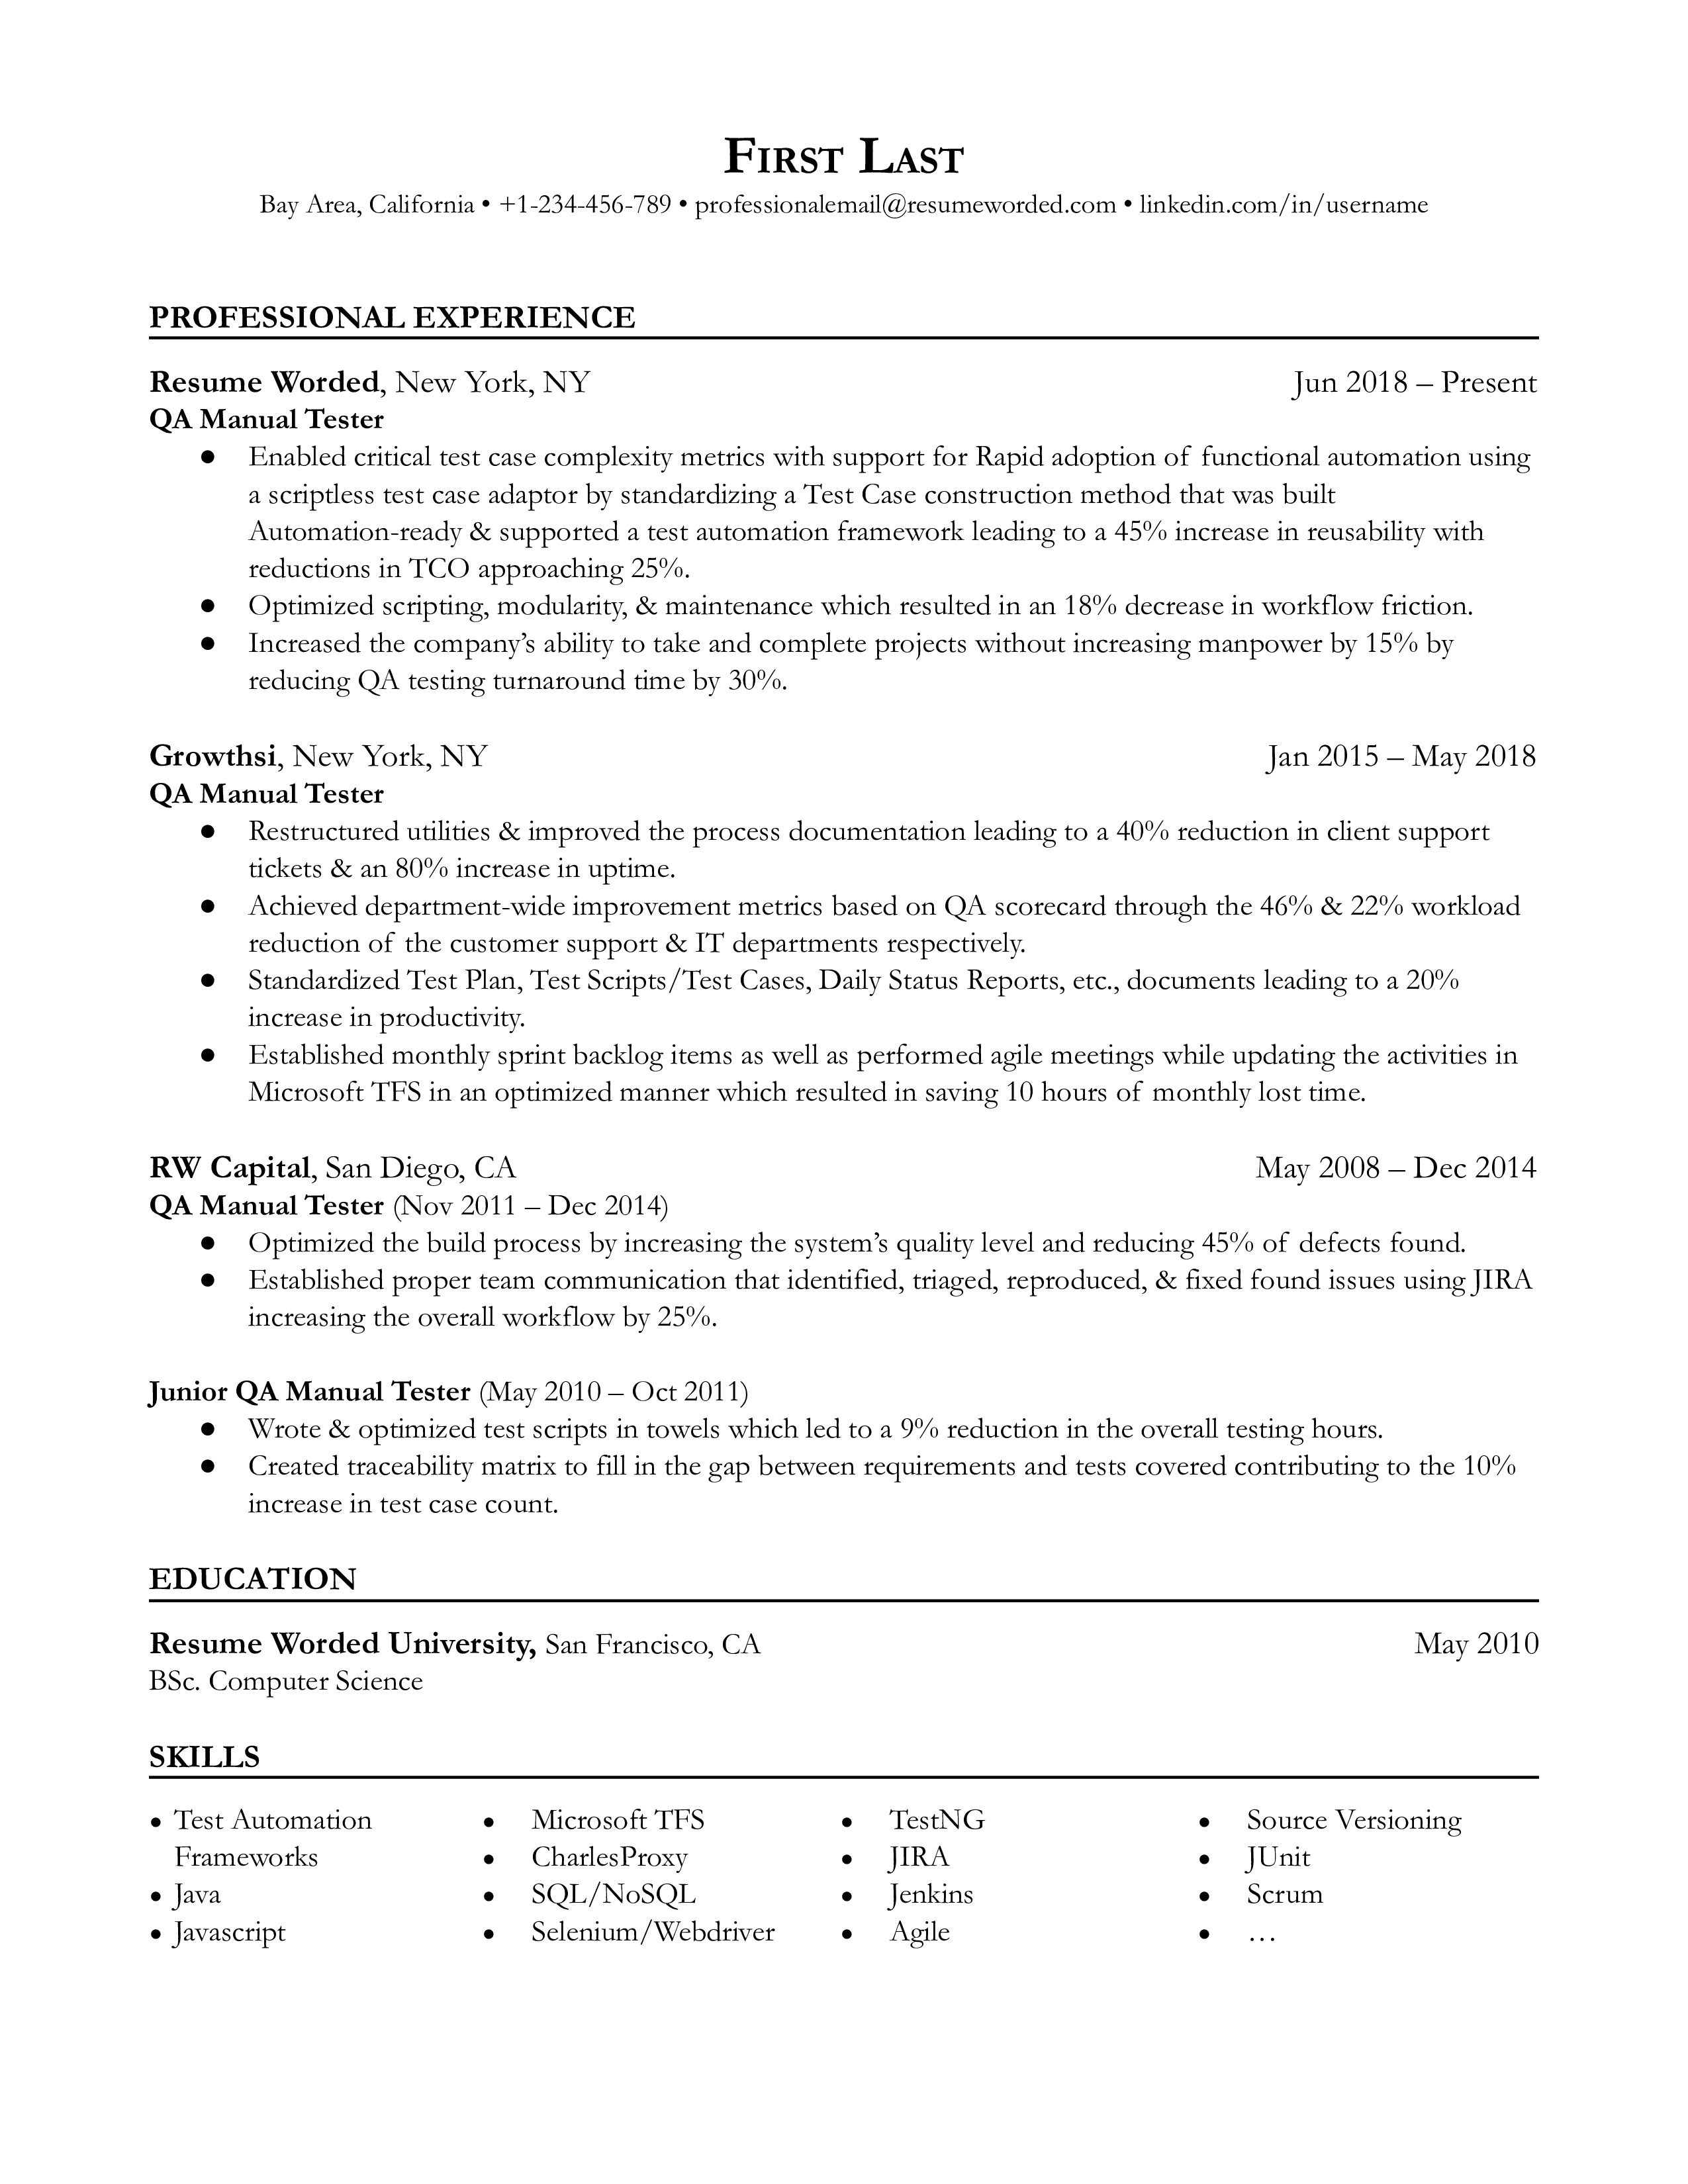 QA manual tester sample resume that highlights the applicants relevant skill set and tools.